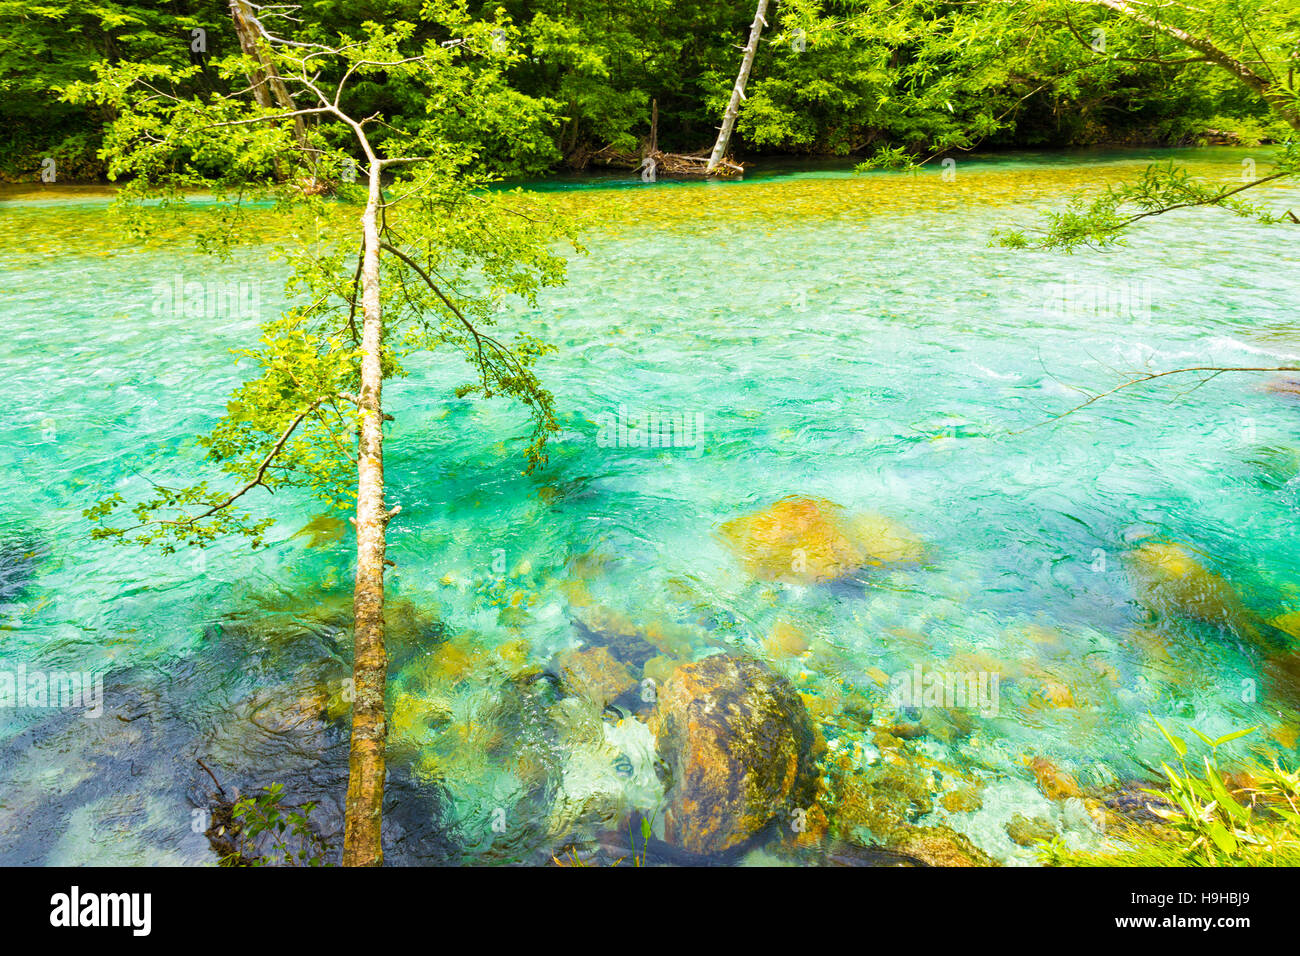 Pristine, turquoise water of the crystal clear Azusa River flows through unmolested forest in Japanese Alps town of Kamikochi Stock Photo